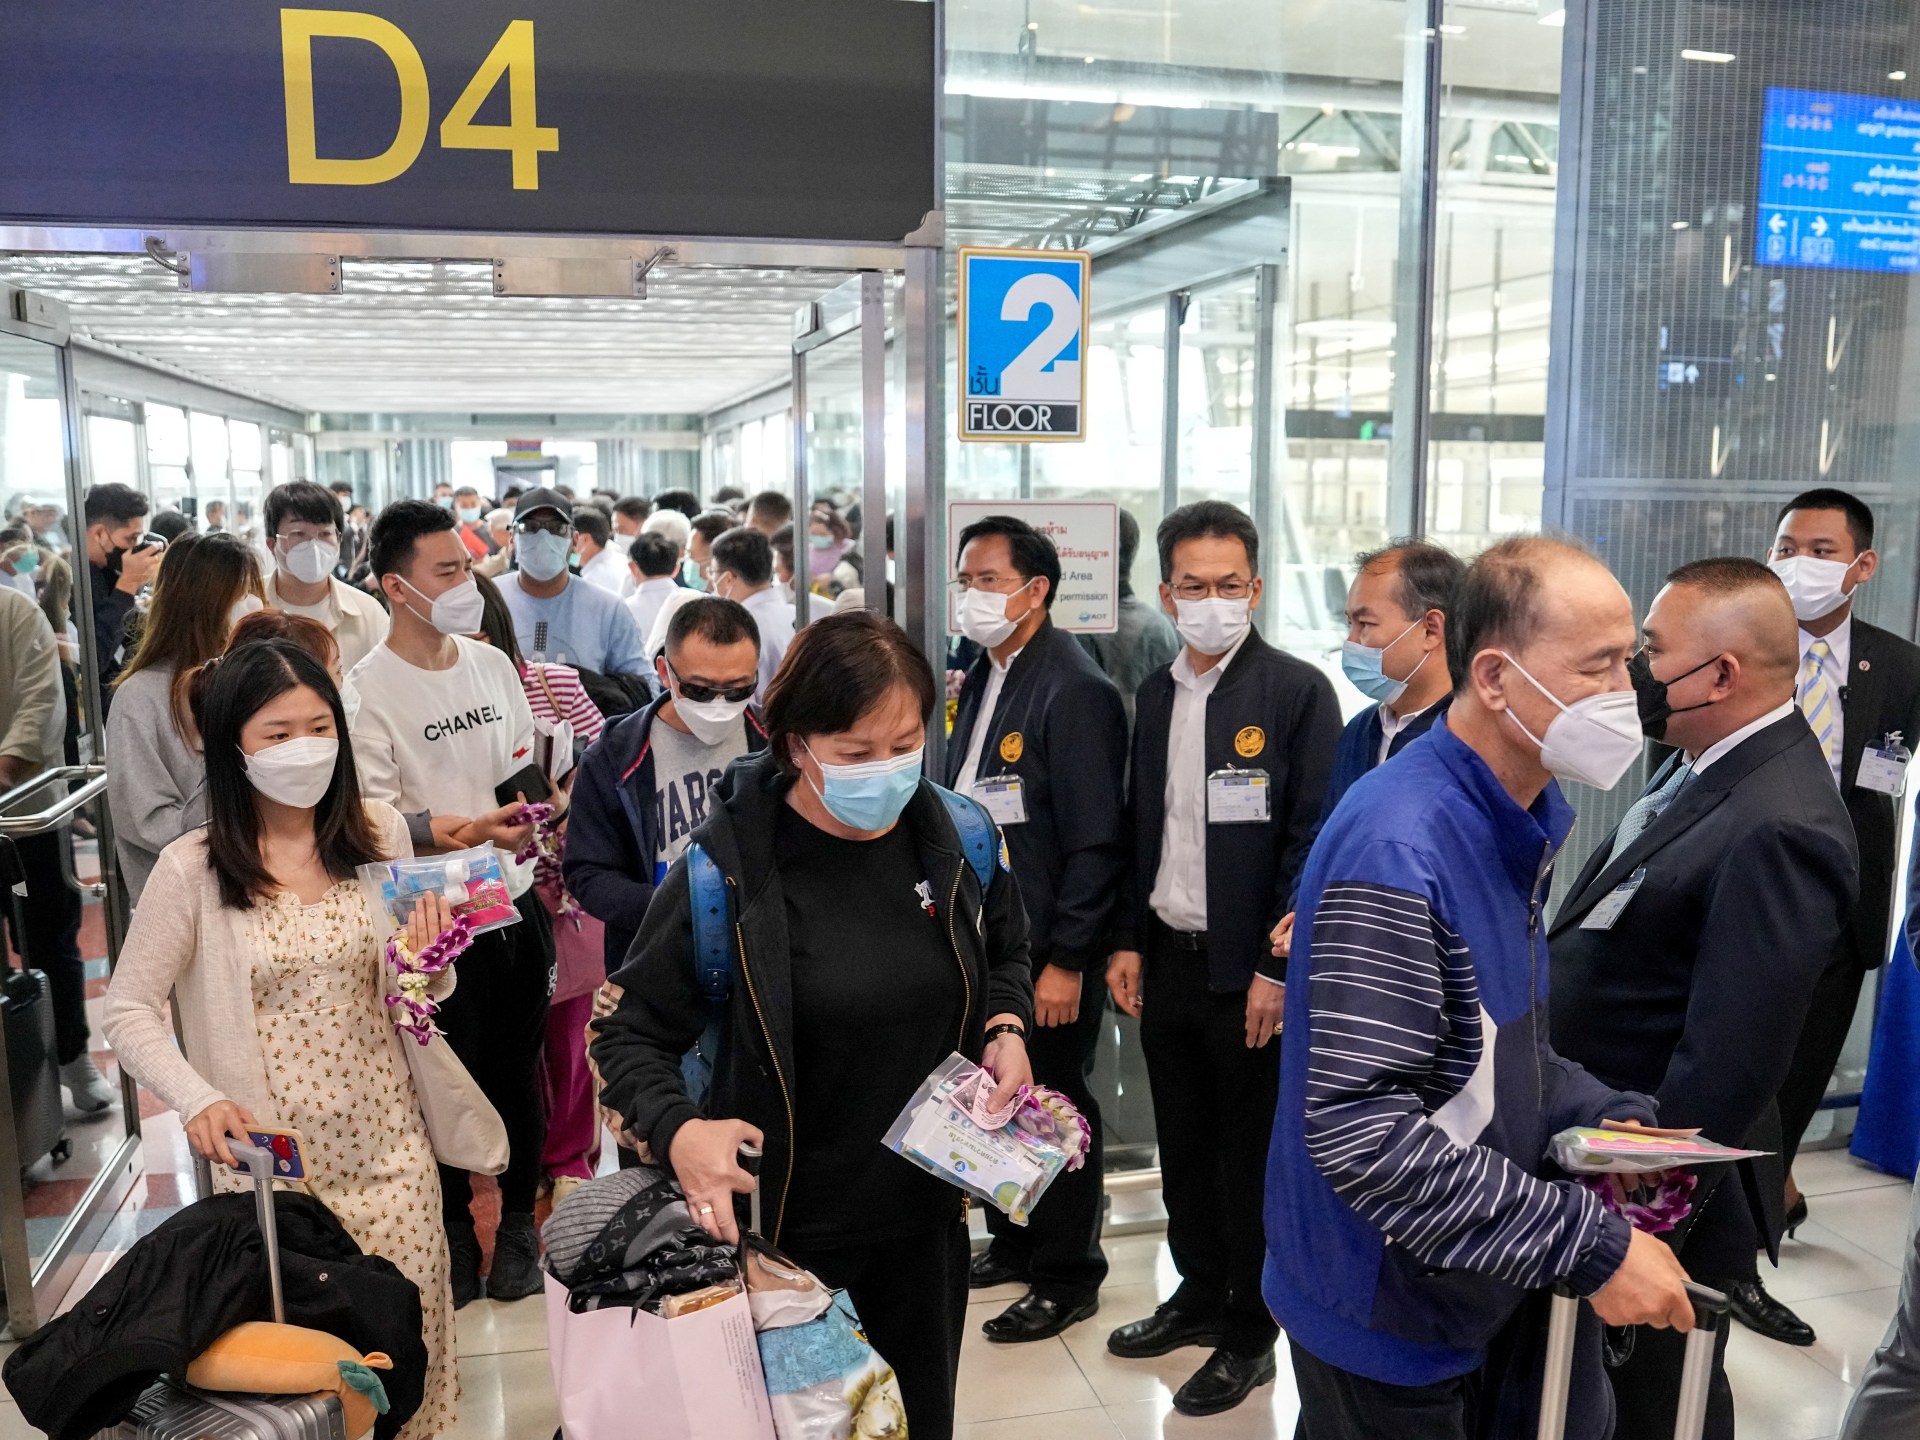 China’s flight bookings way down despite reopening, data shows | Economy